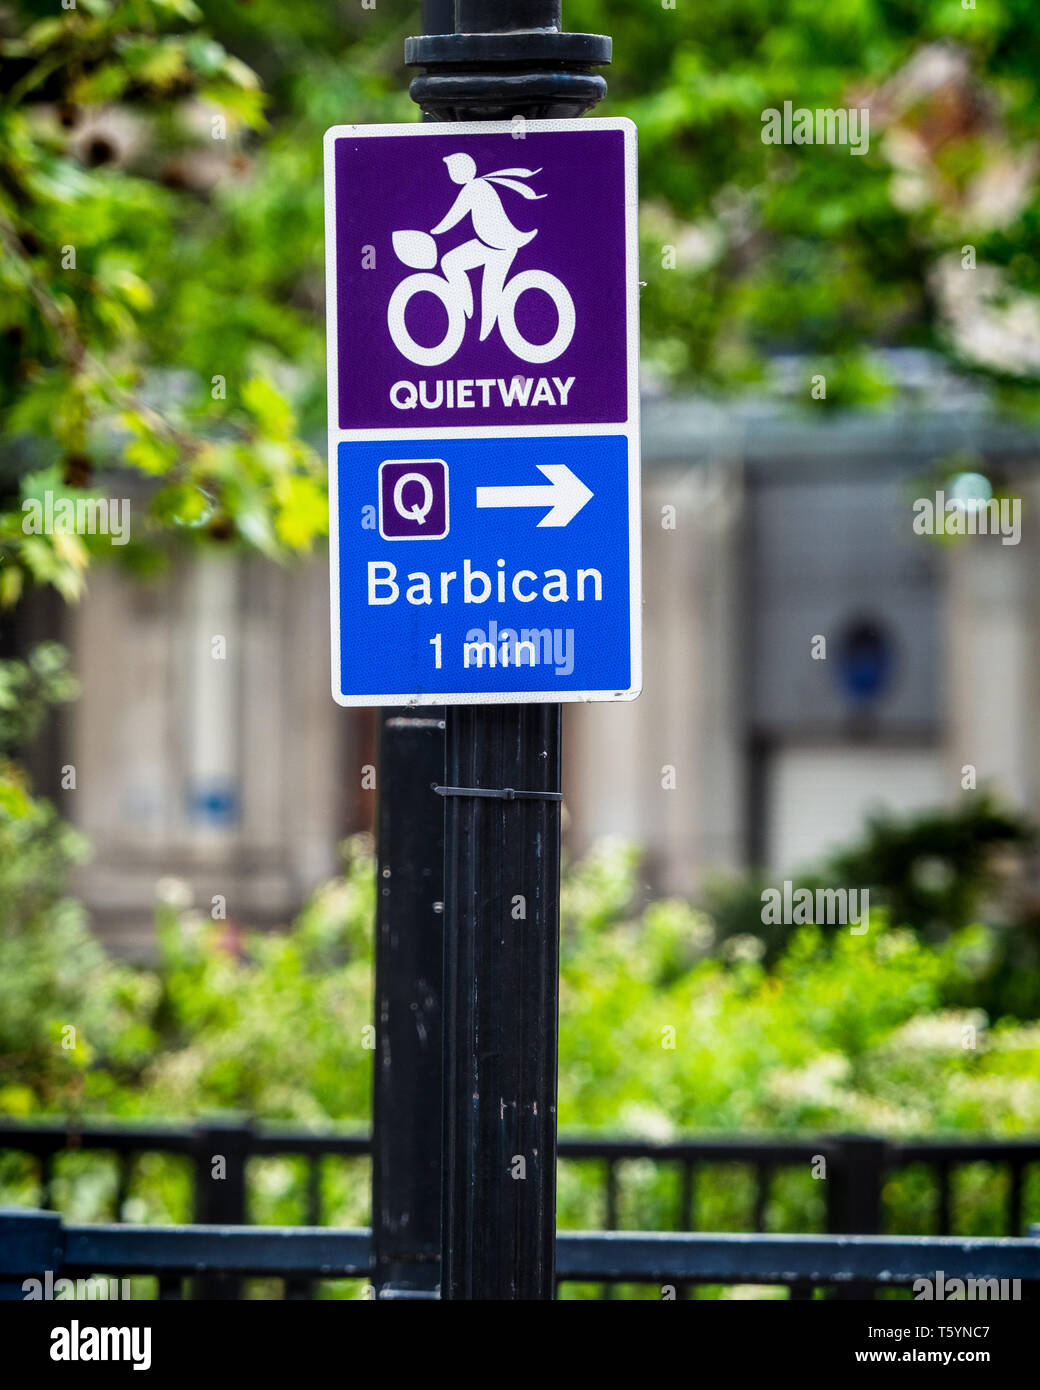 Sign for one of the London Cycling Quietways cycle routes - overcome barriers to cycling, for cyclists who want to use quieter, low-traffic routes Stock Photo